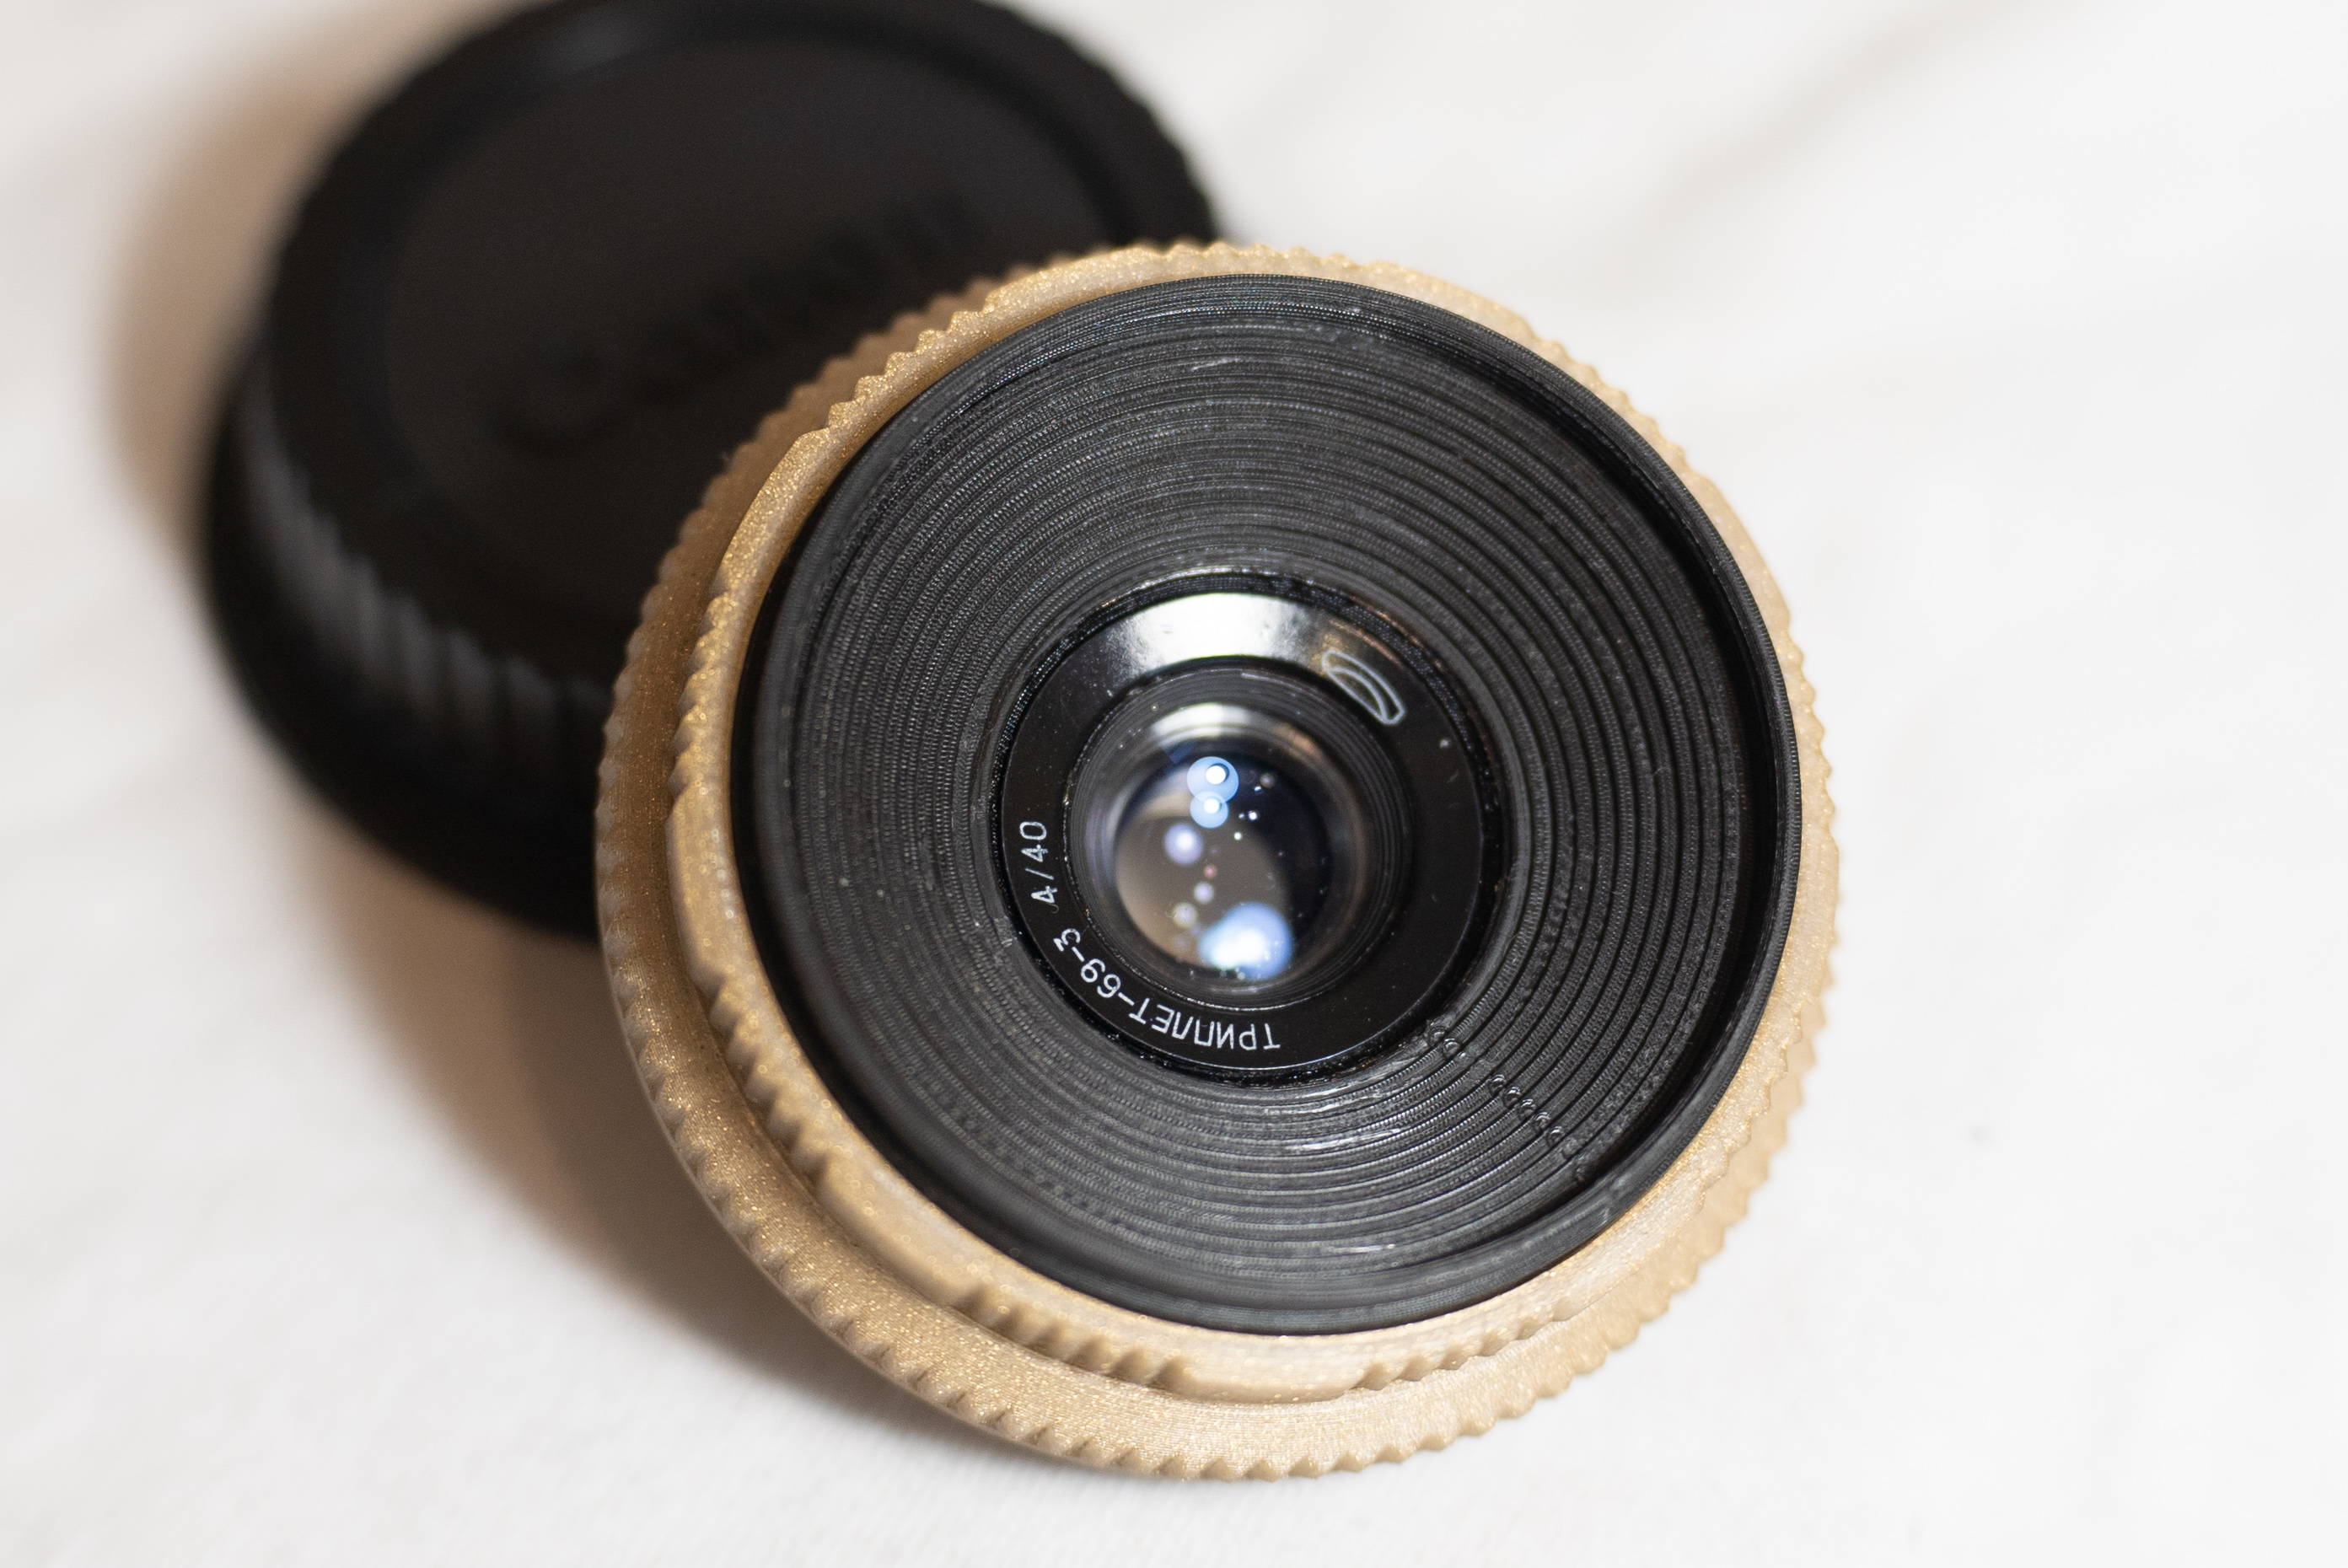 Type of adapted lens.